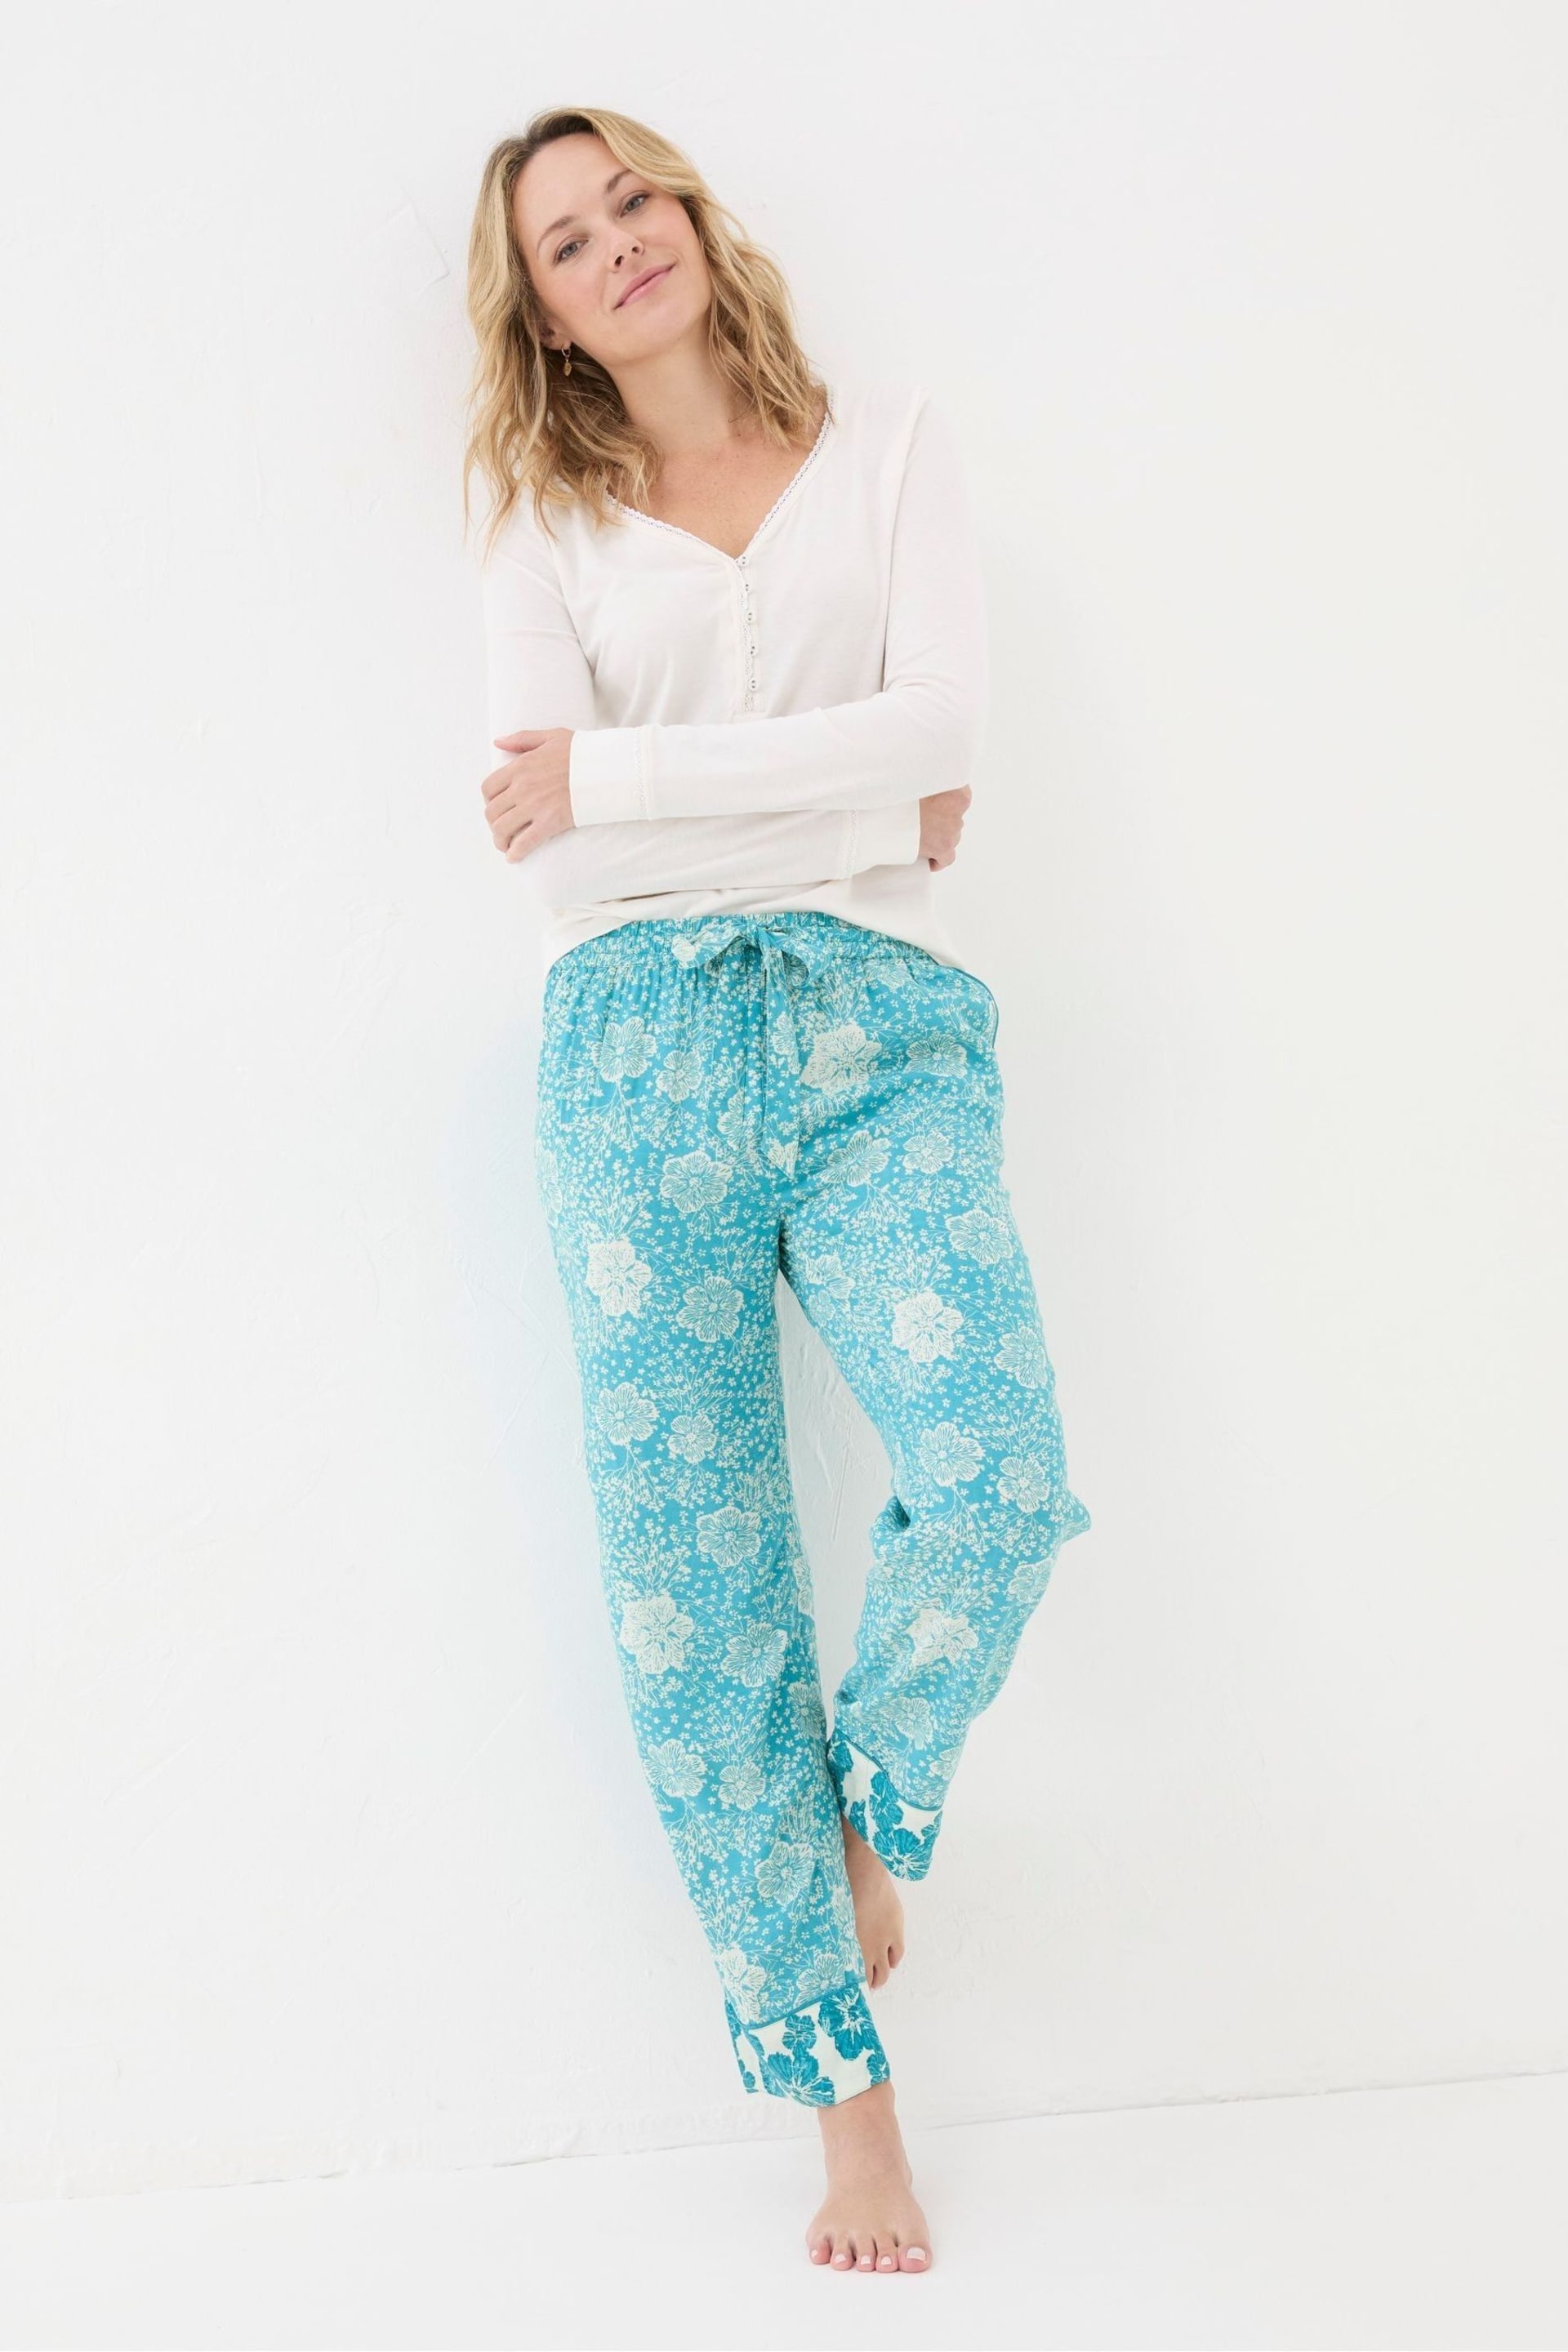 FatFace Blue Eva Spaced Floral Trousers - Image 1 of 4